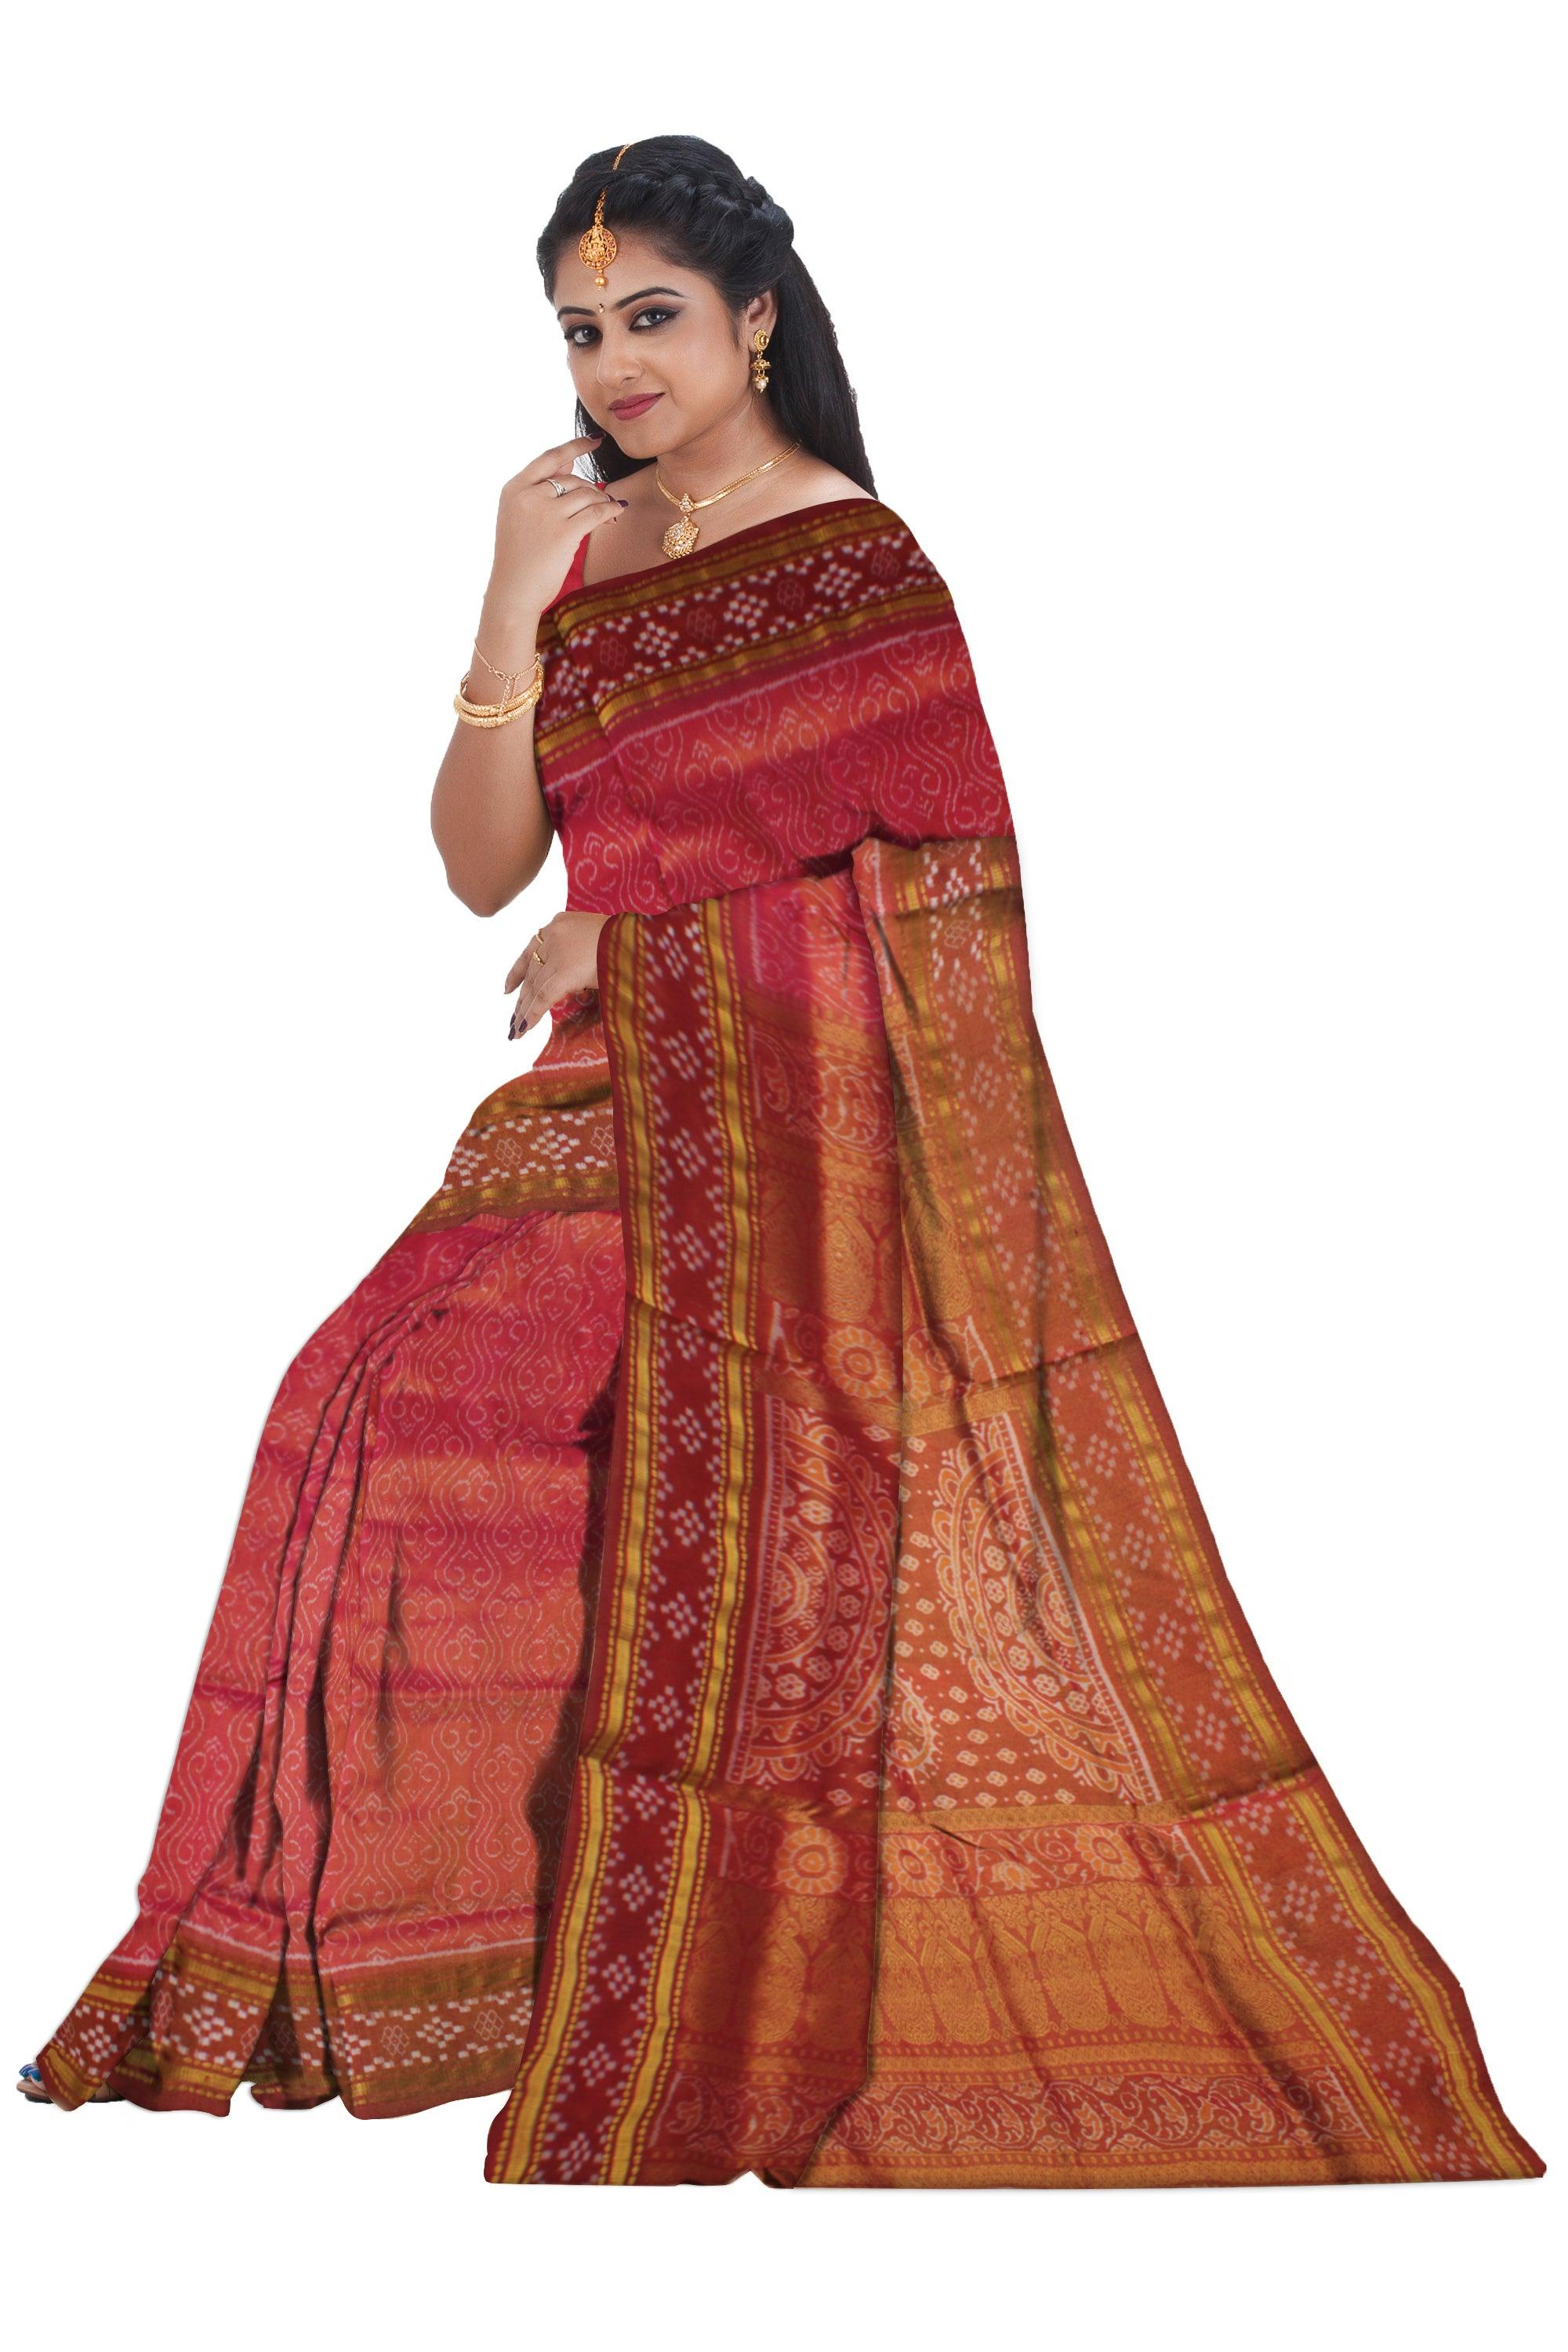 ROSY PINK AND MAROON COLOR IKAT PATTERN PURE TISSUE SILK SAREE, WITH BLOUSE PIECE. - Koshali Arts & Crafts Enterprise